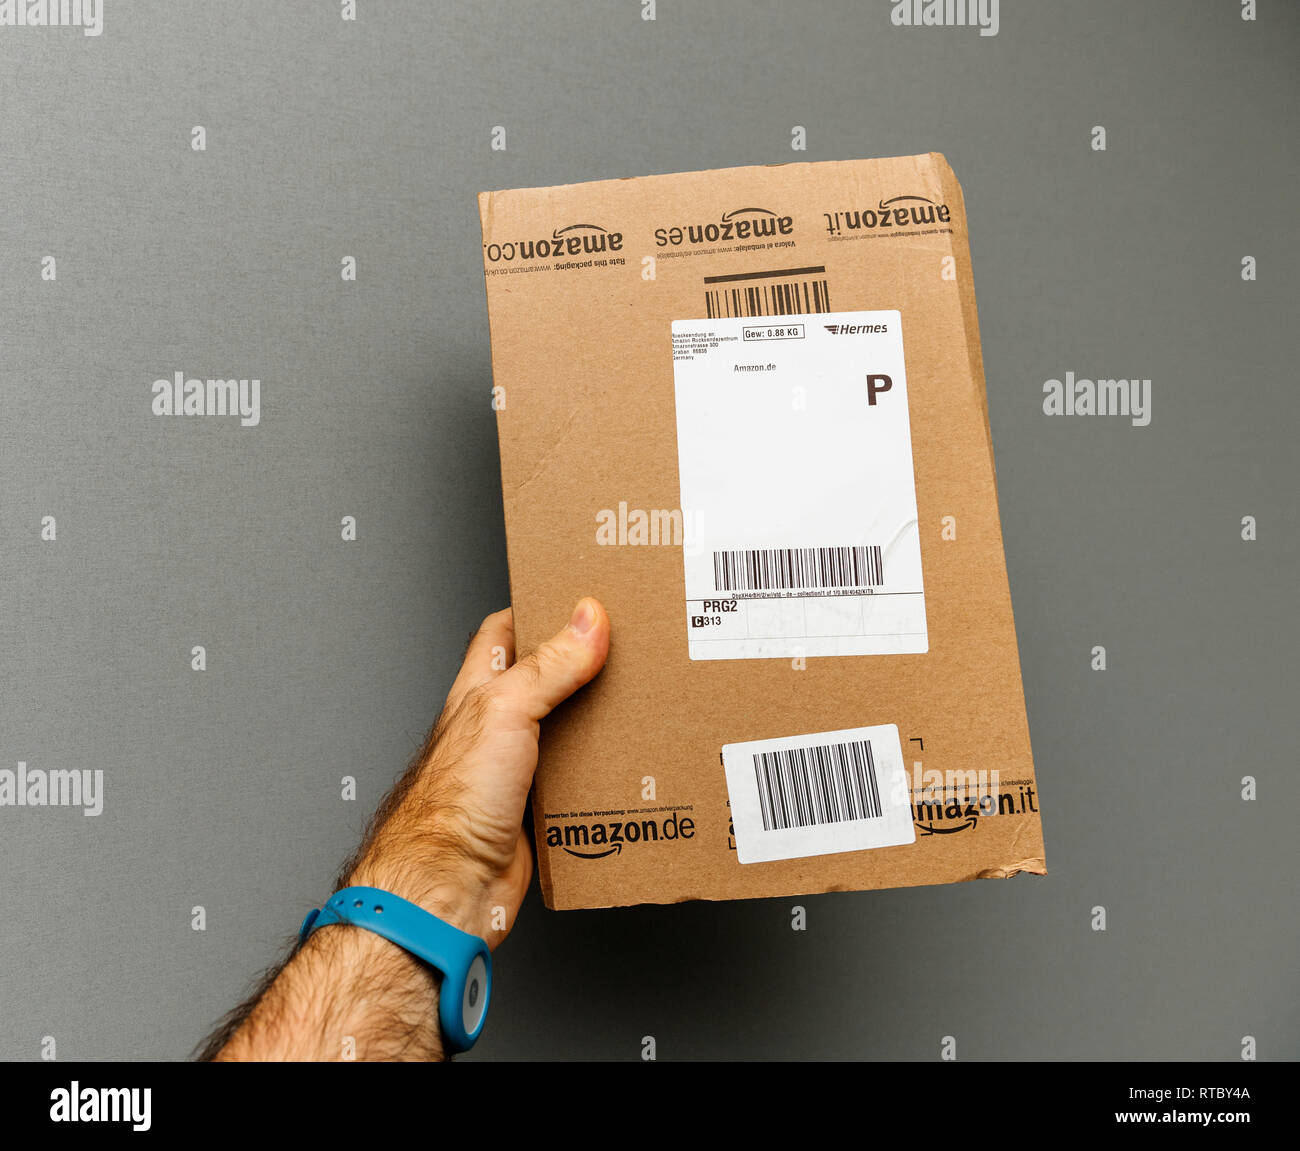 Hermes Delivery High Resolution Stock Photography and Images - Alamy